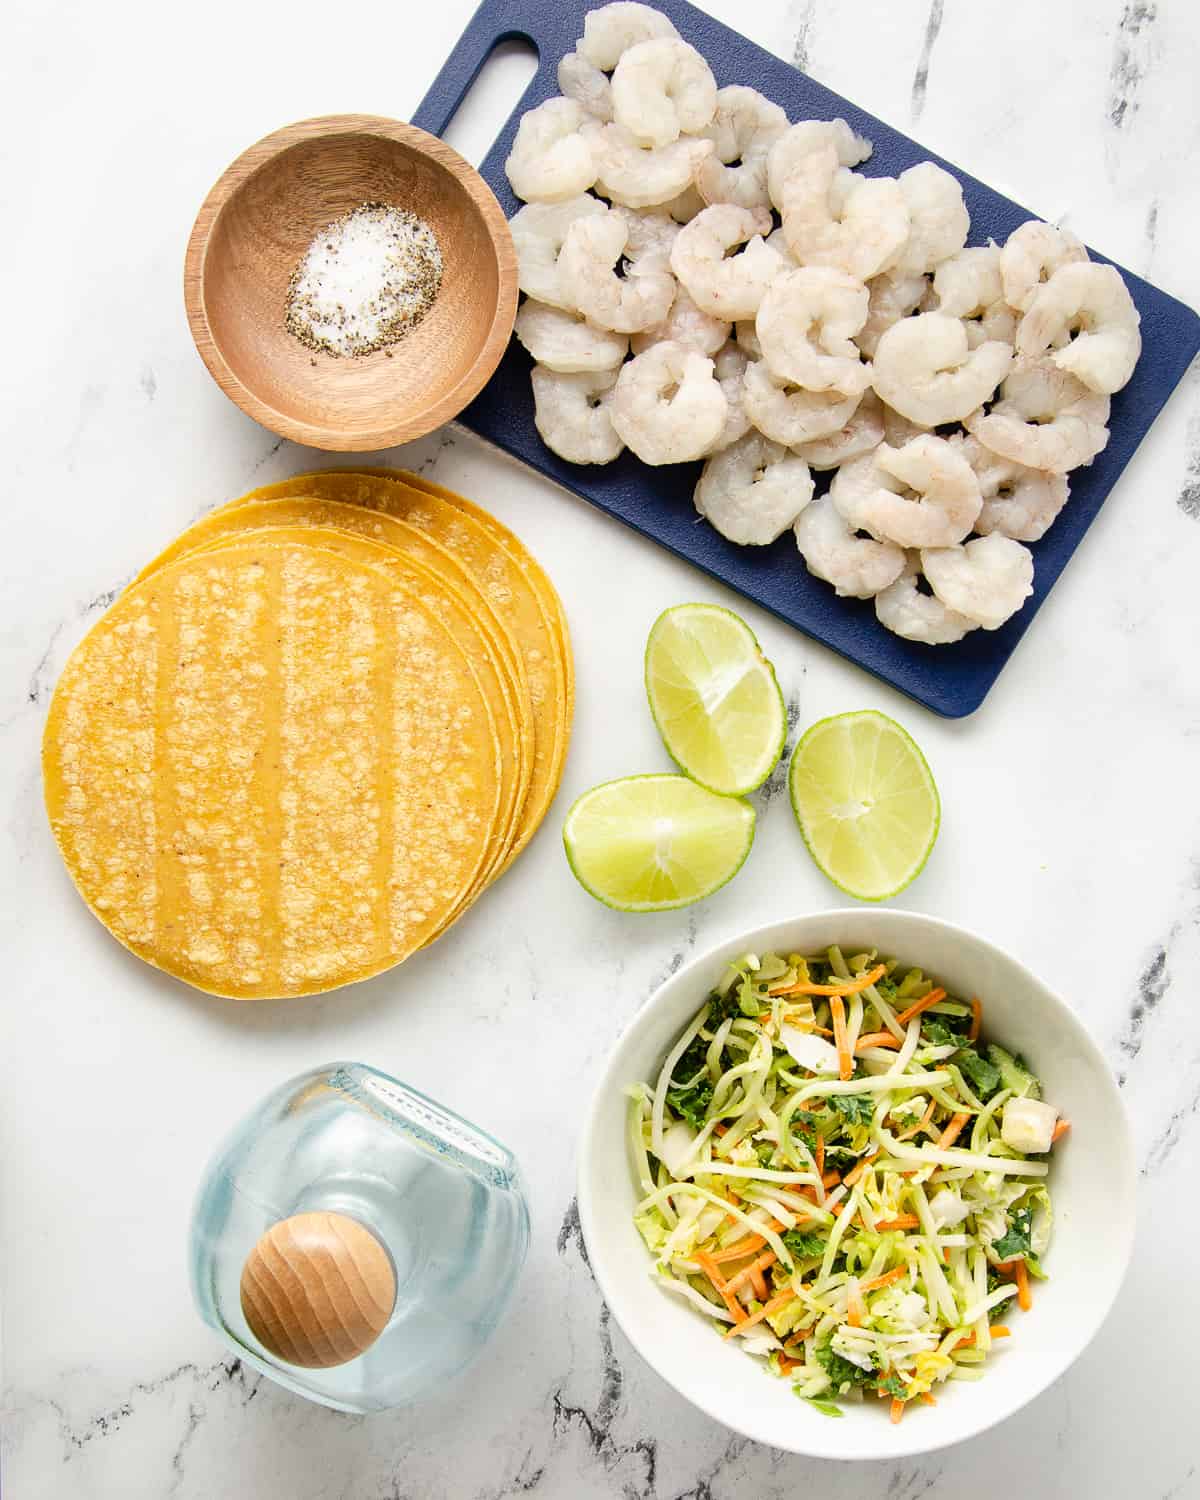 Ingredients needed for tequila lime shrimp tacos: shrimp, seasonings, slaw, lime, and tequila.